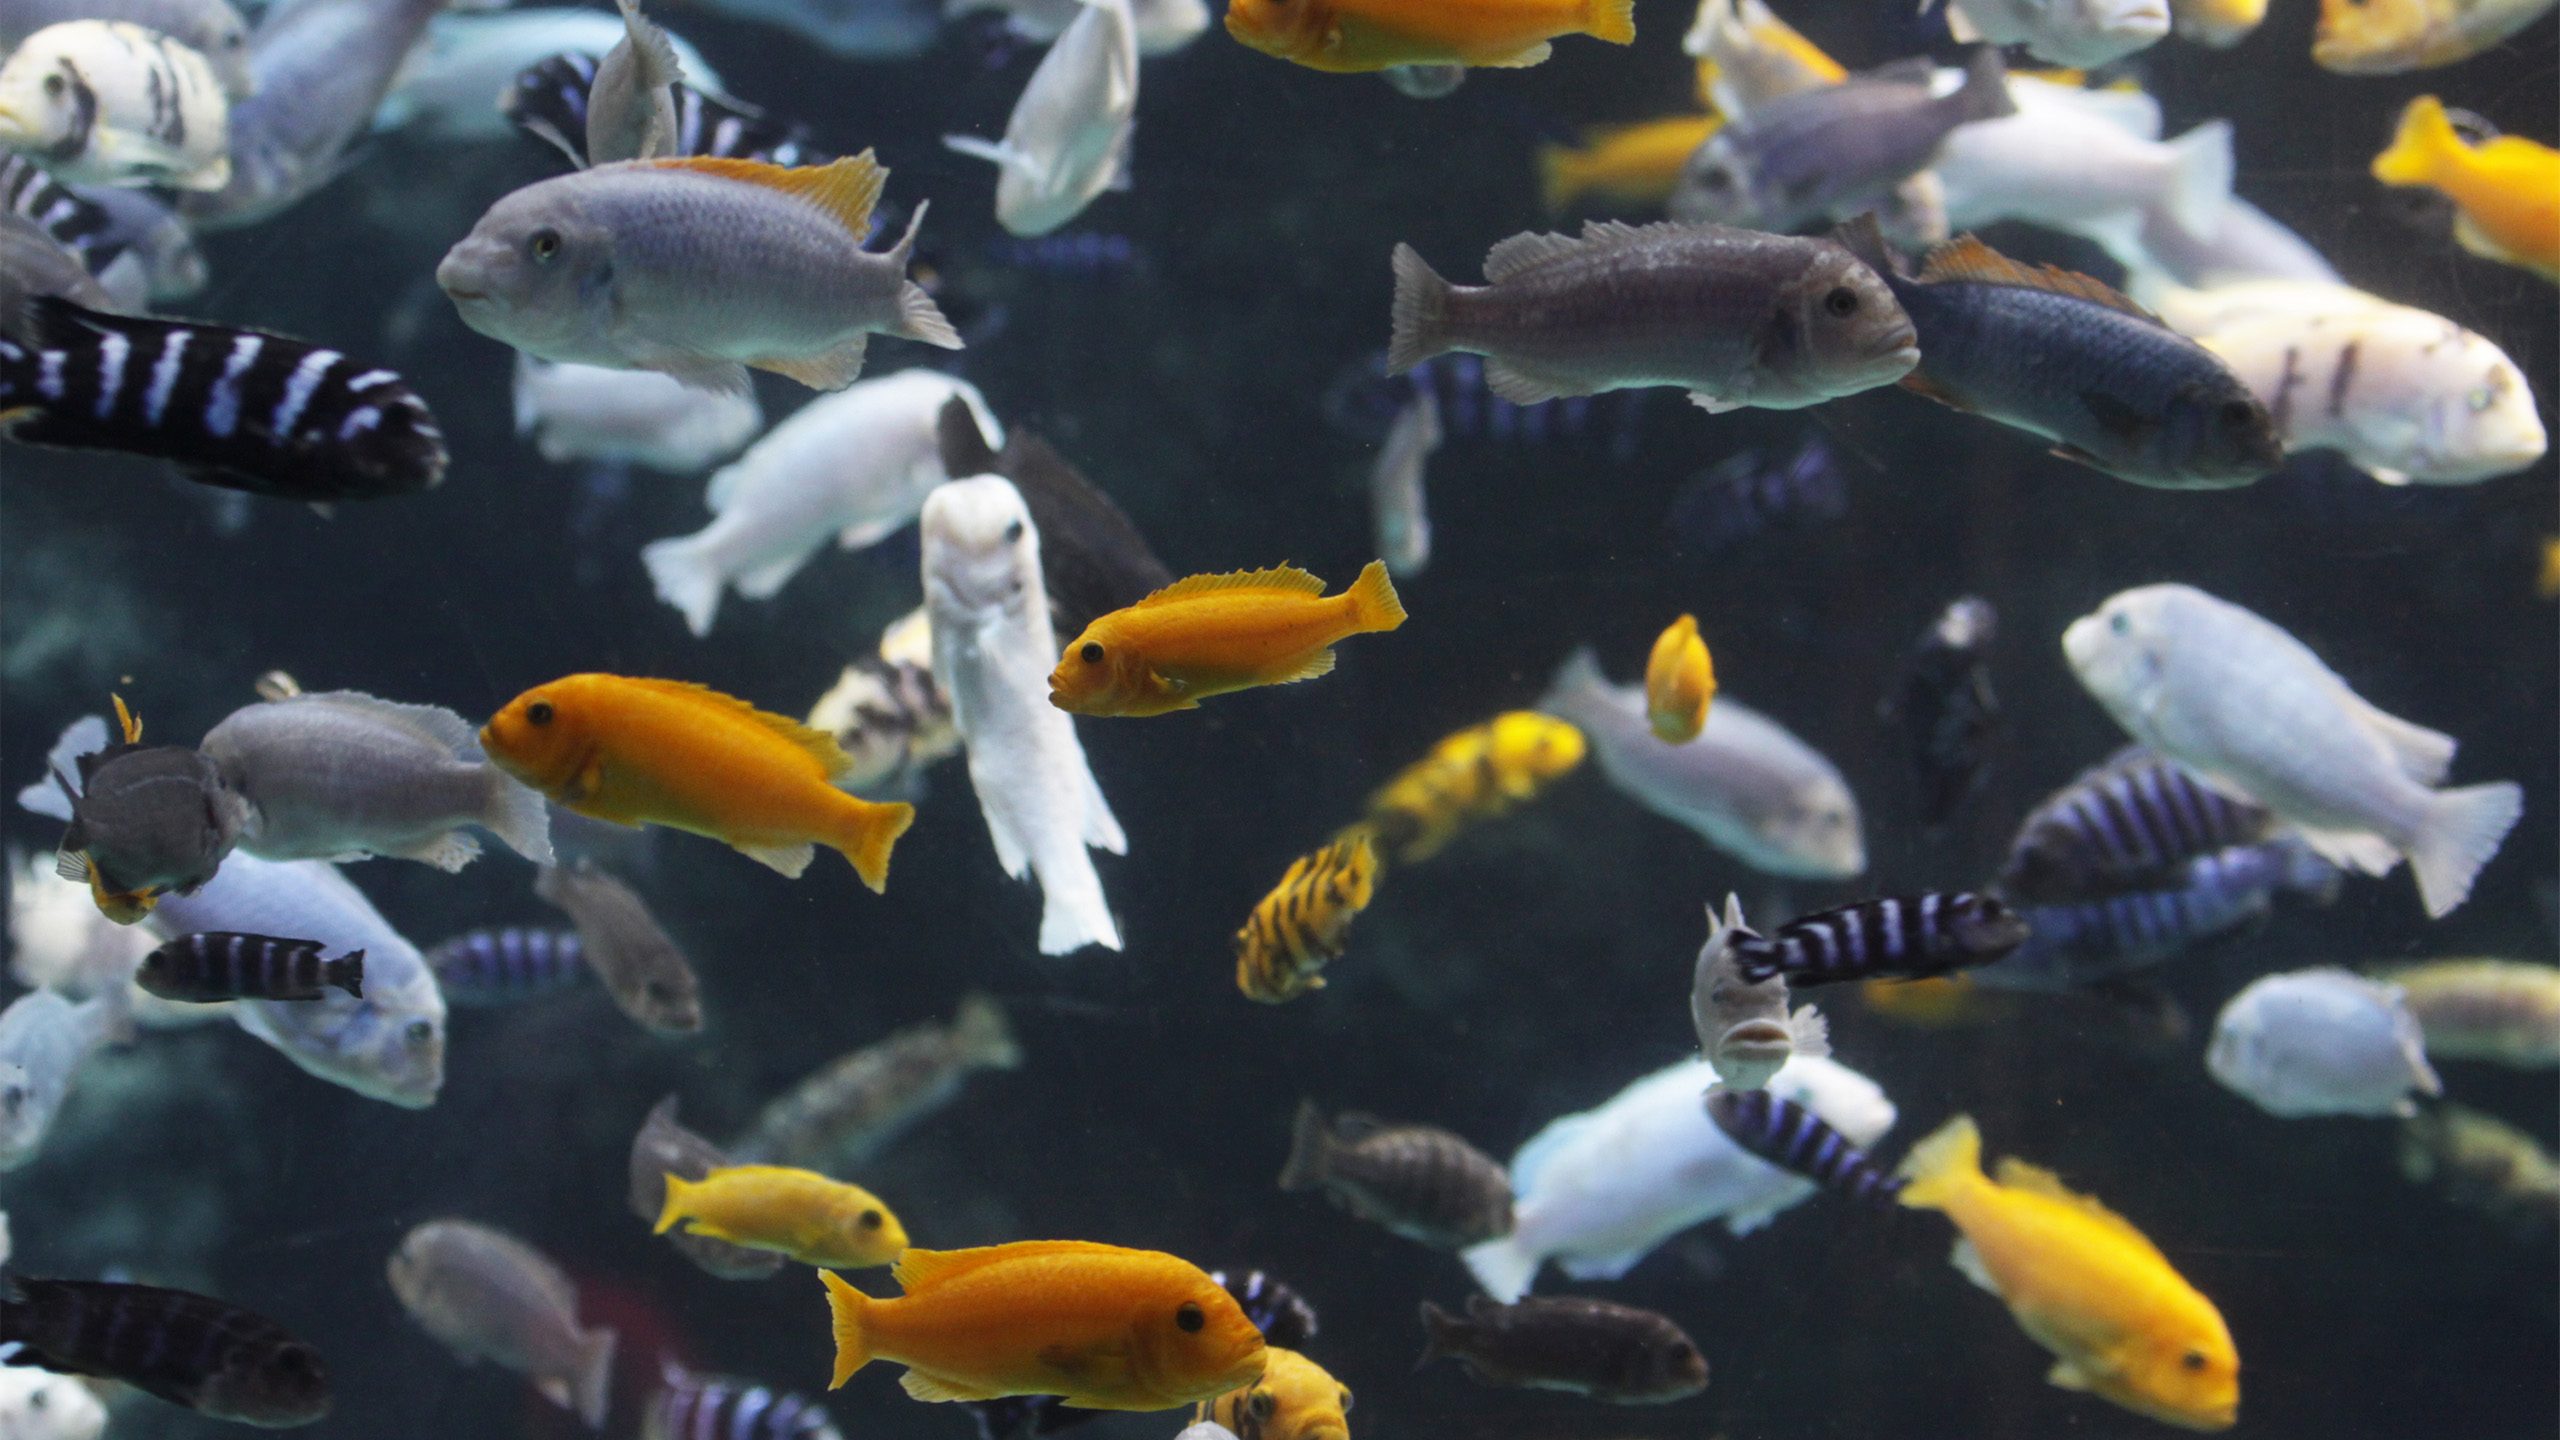 Colorful crowd: different species of Malawi cichlids | Chris Hill, Shutterstock